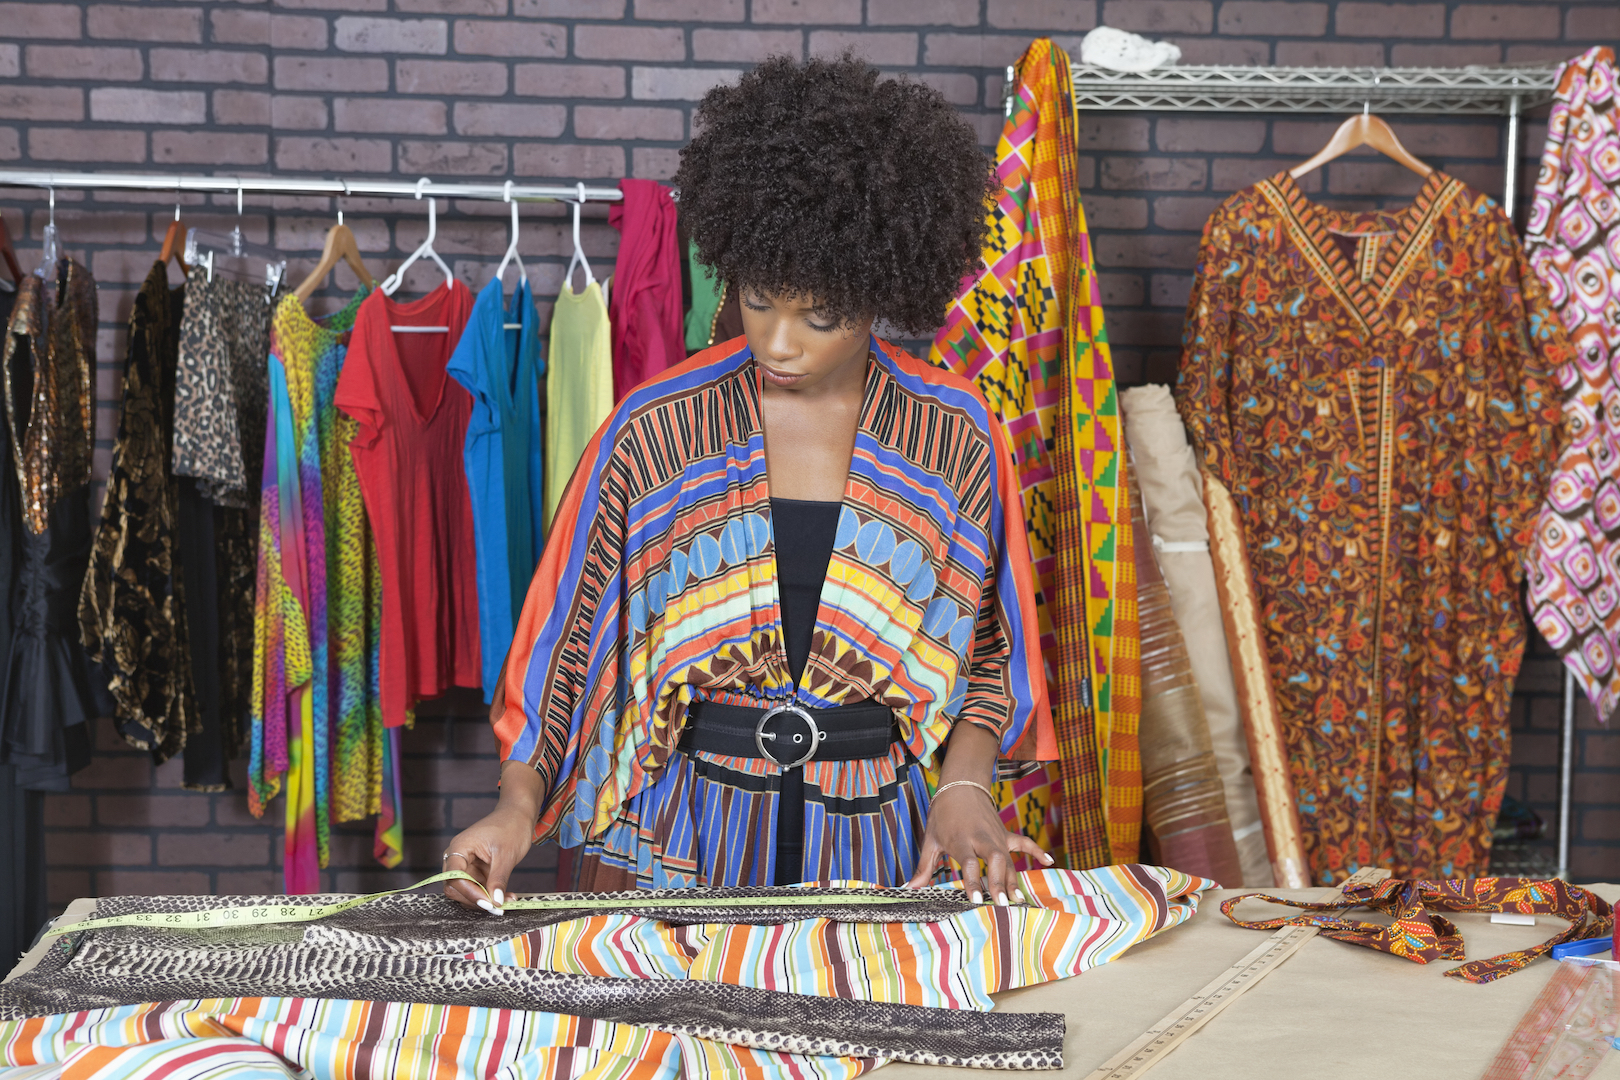 Female fashion designer measuring fabric surrounded by colourful outfits